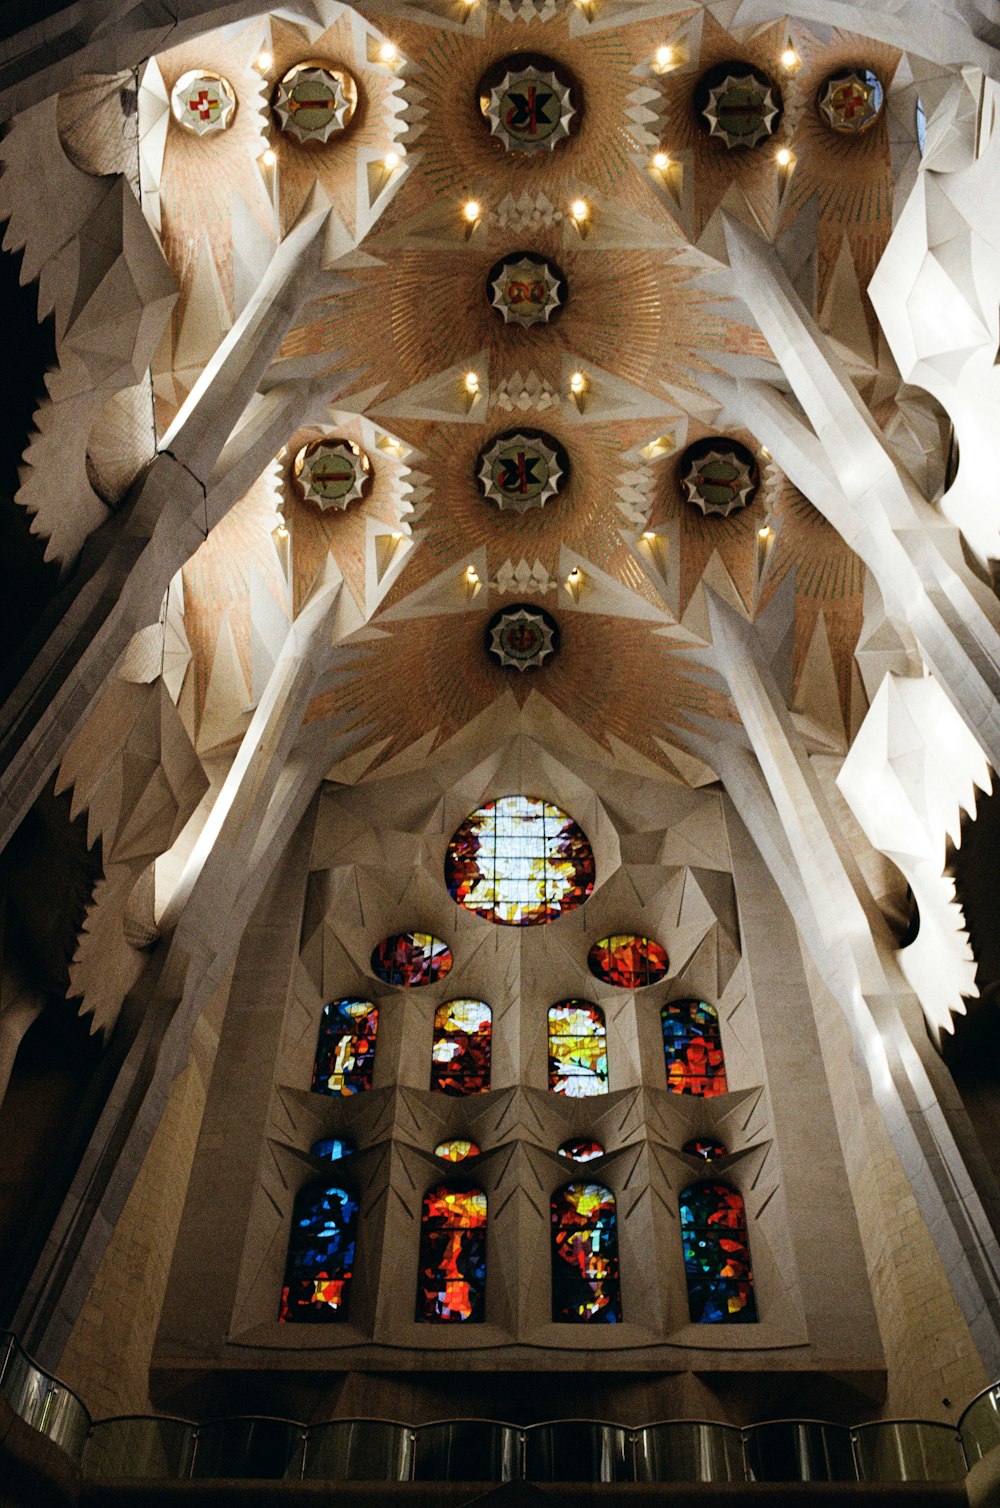 the ceiling of a church with stained glass windows